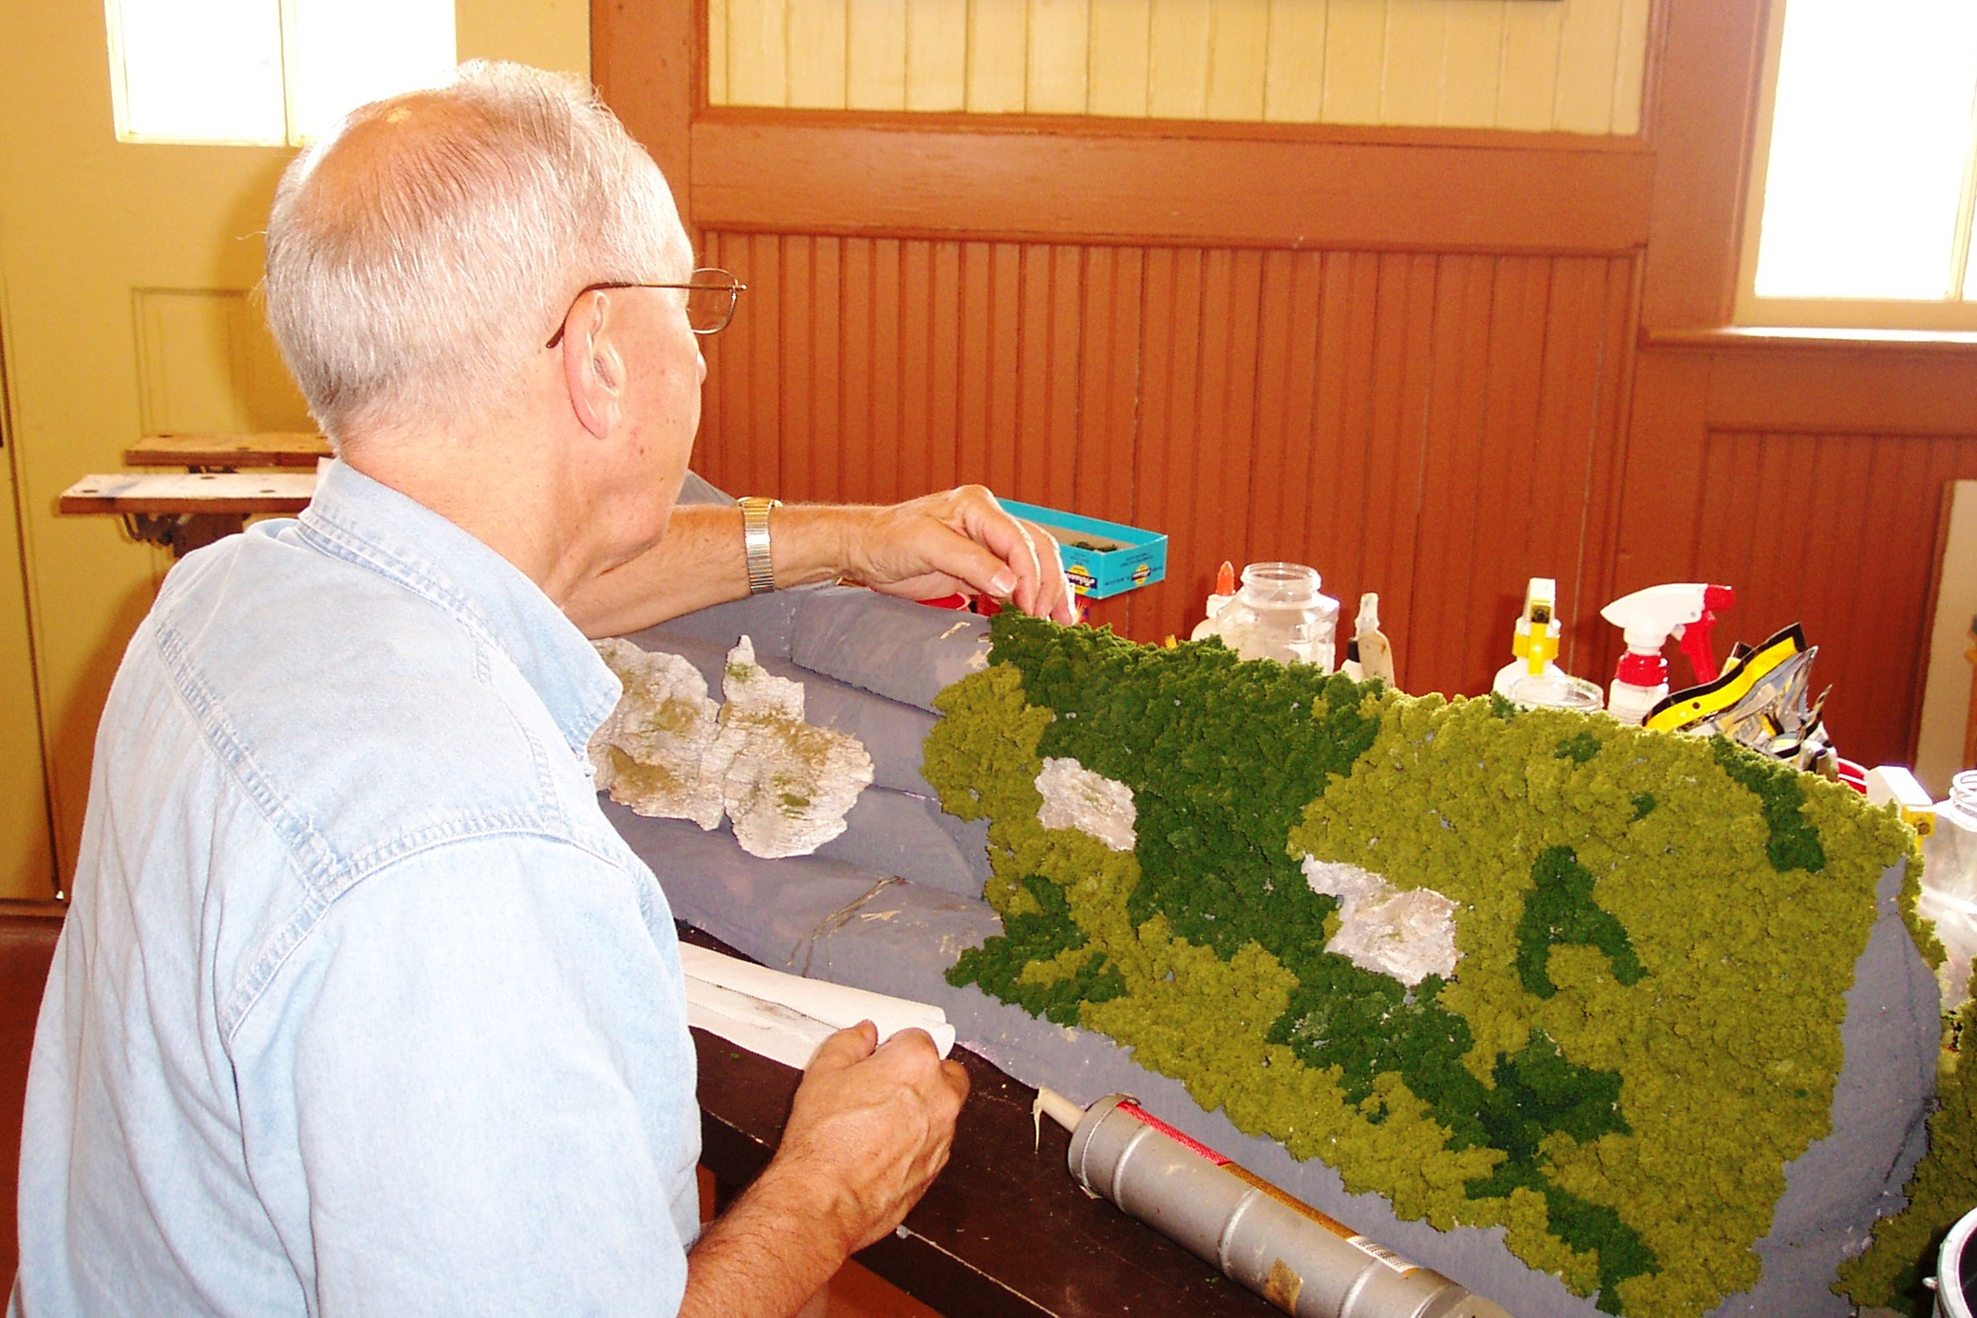 Apple Valley Model Railroad Clubs  
       member Doug Maroldi adding scenery to one of the mountains on the layout